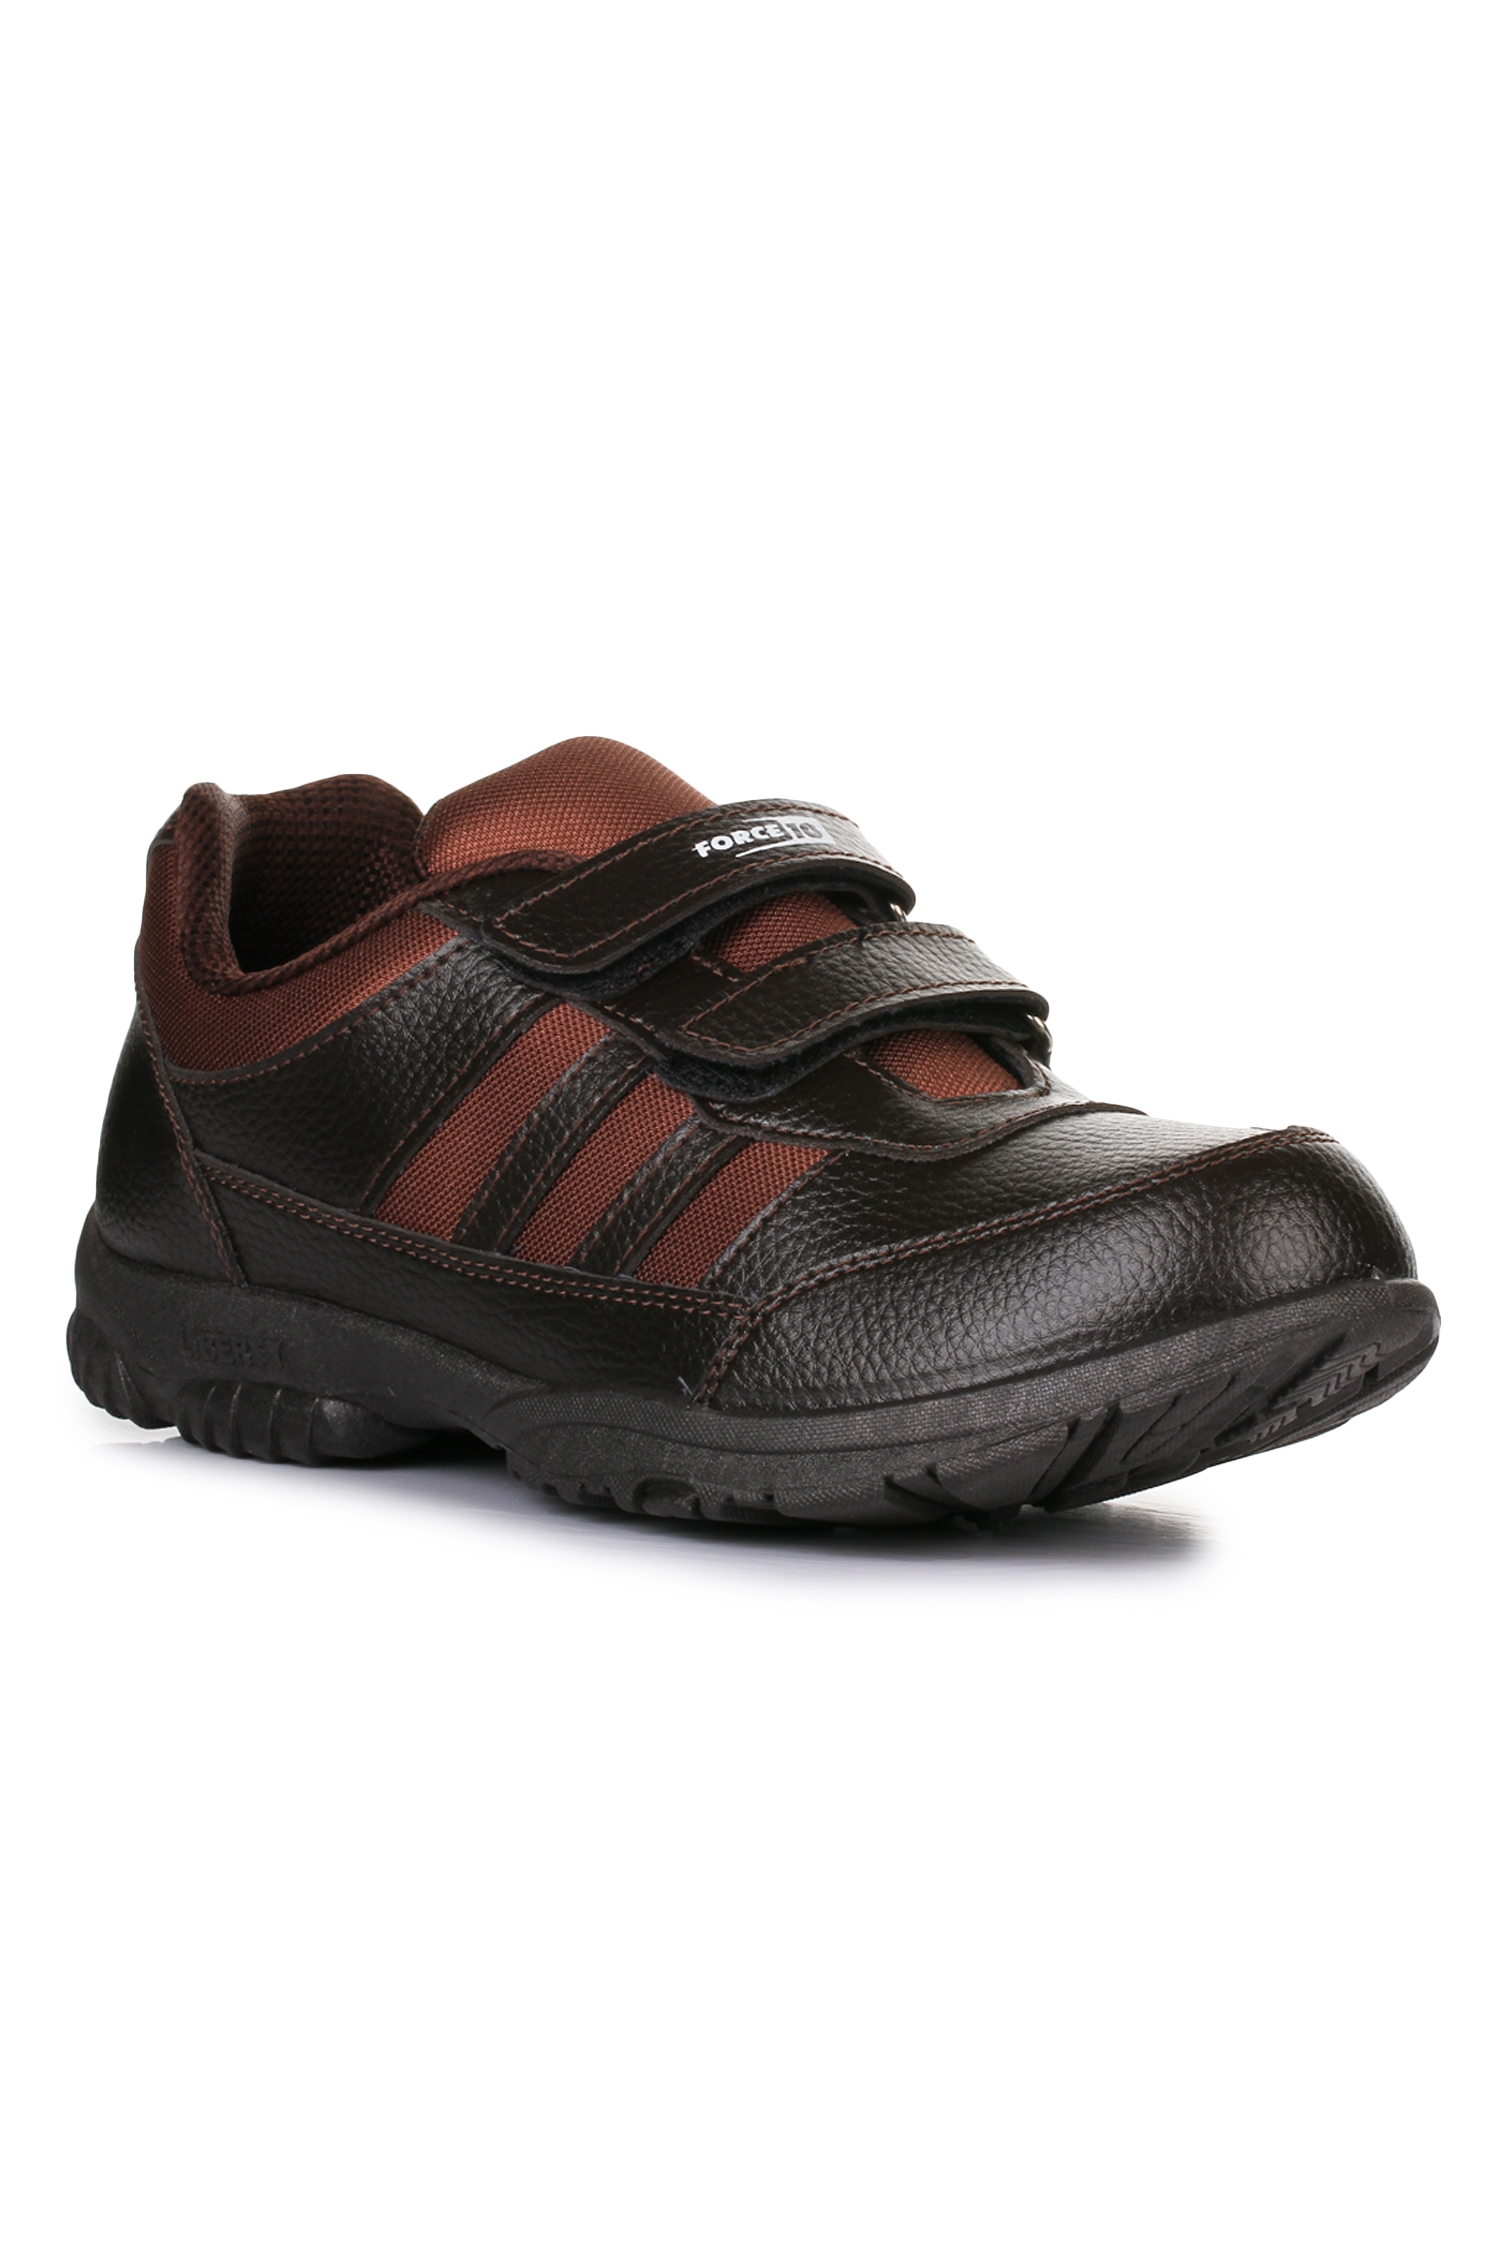 Liberty | Liberty Force 10 Brown School Shoes 8151-18VEL_Brown For - Boys